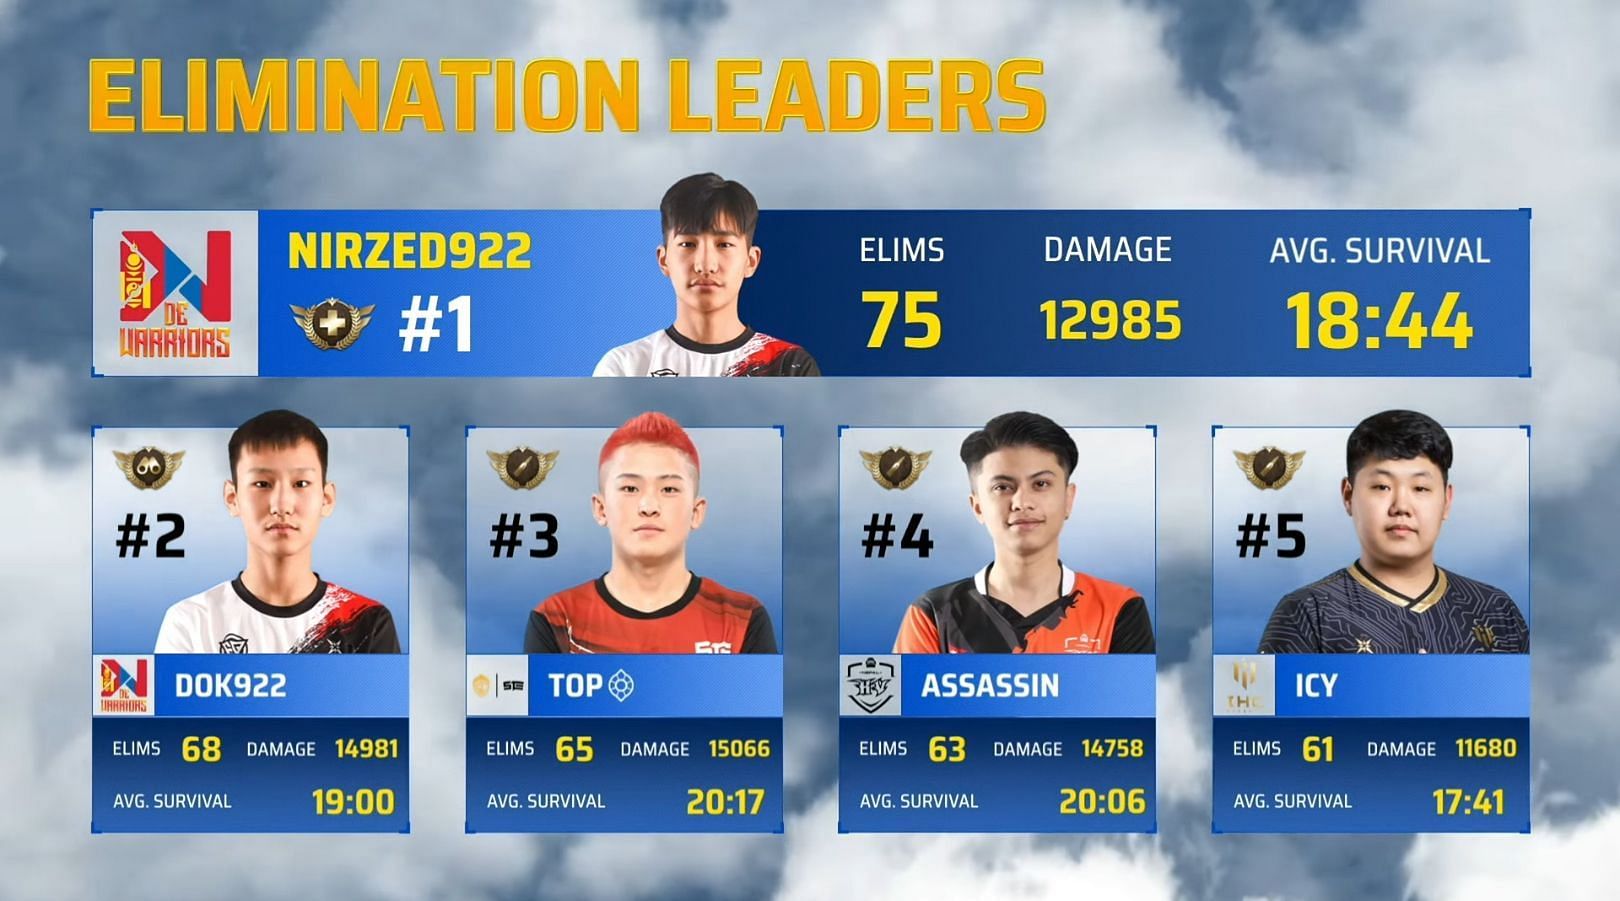 Nirzed922 has claimed first place in the overall kill leaderboard (Image via PUBG Mobile)